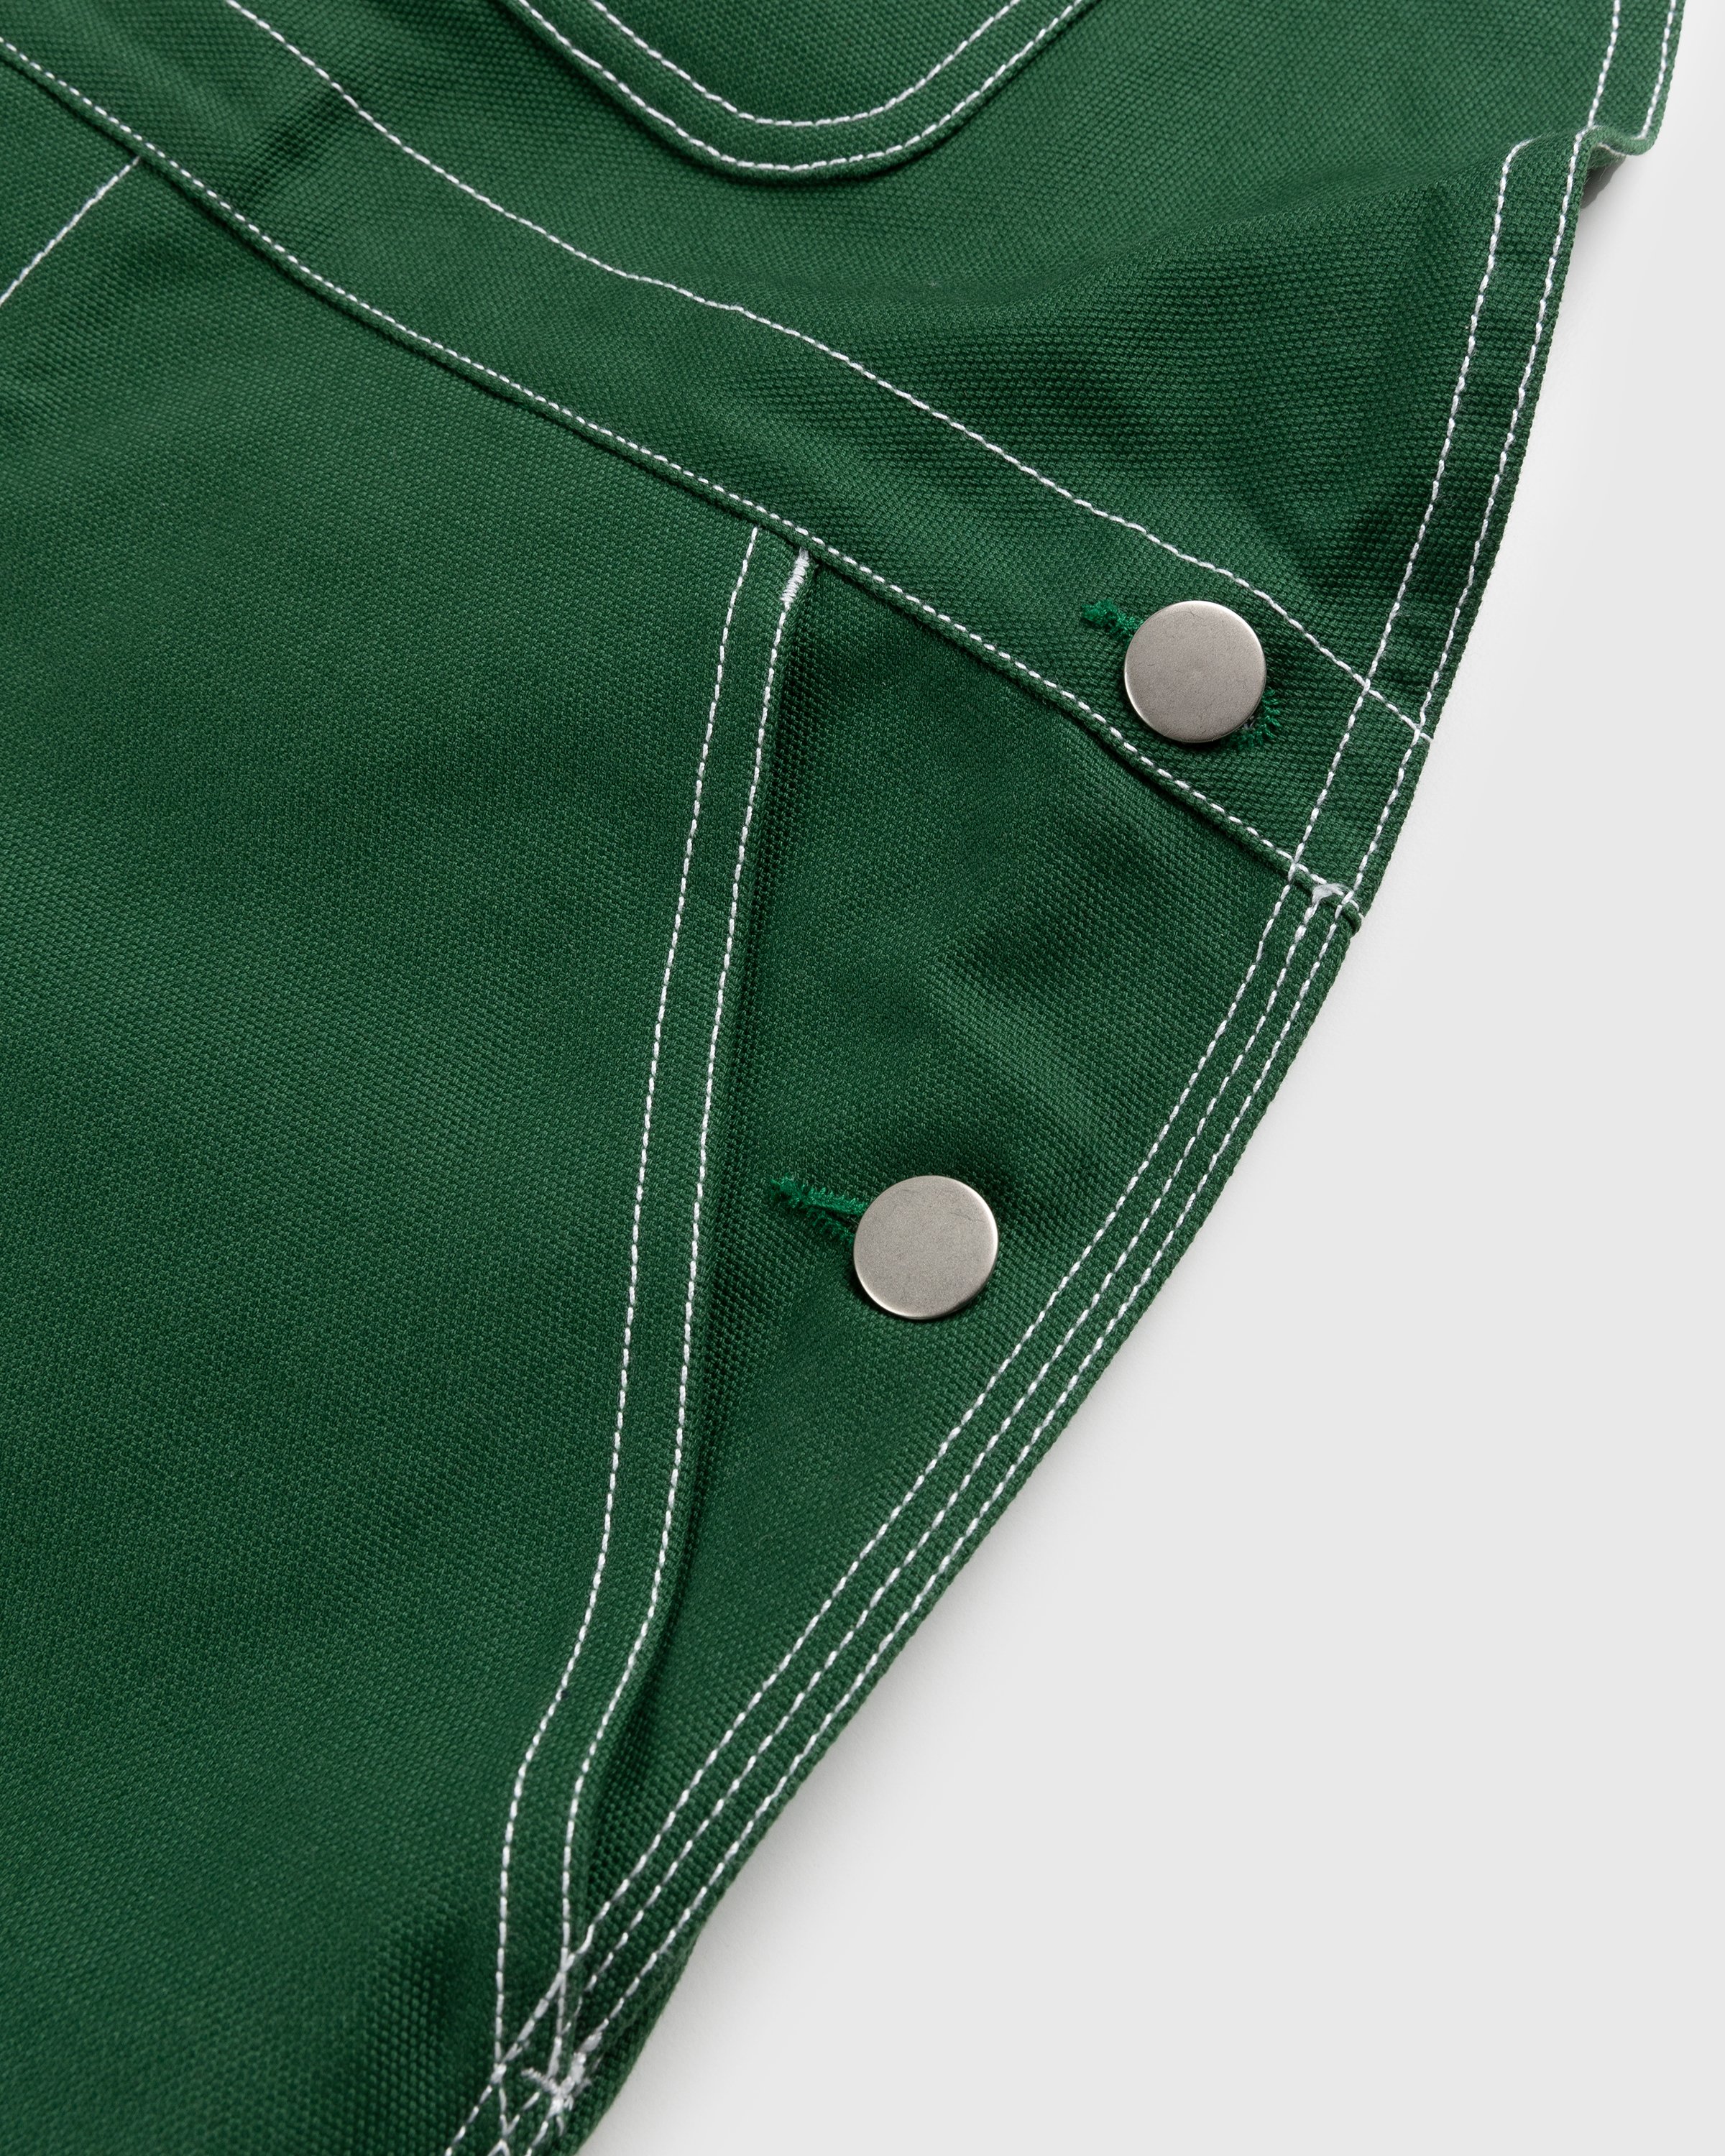 RUF x Highsnobiety - Cotton Overalls Green - Clothing - Green - Image 3